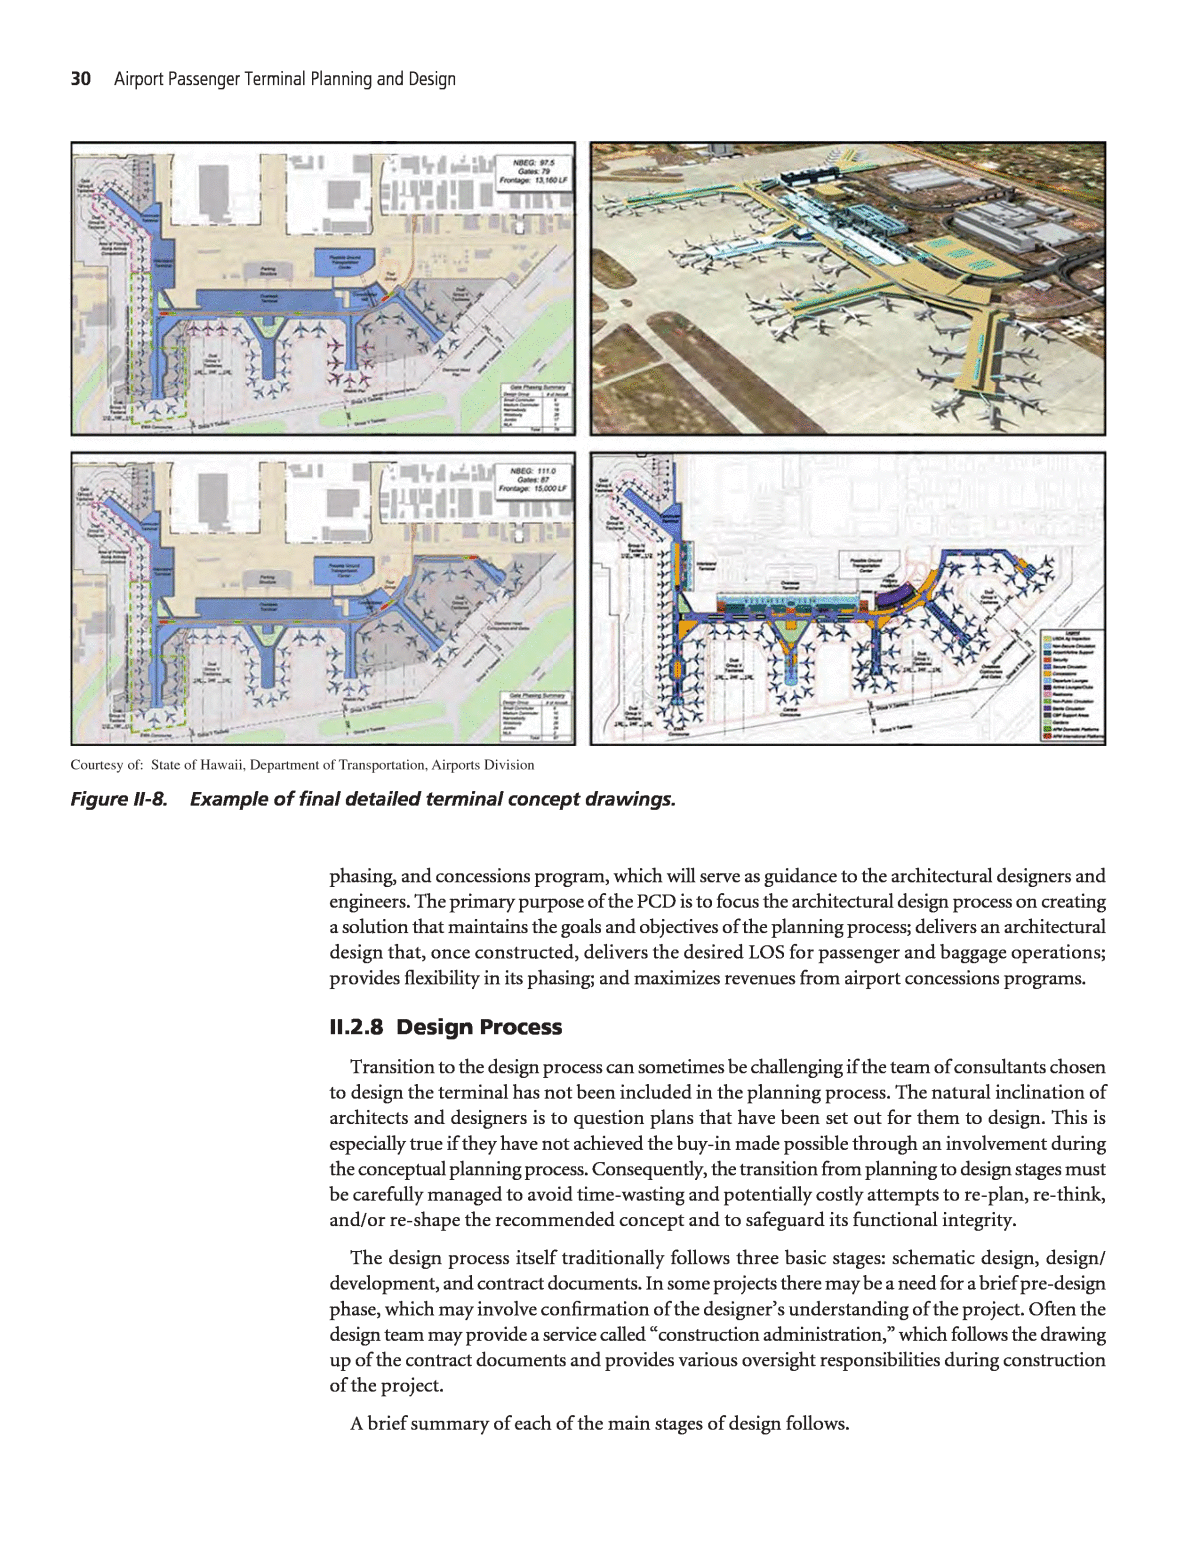 Chapter II - Terminal Planning and Design Process, Airport Passenger  Terminal Planning and Design, Volume 1: Guidebook